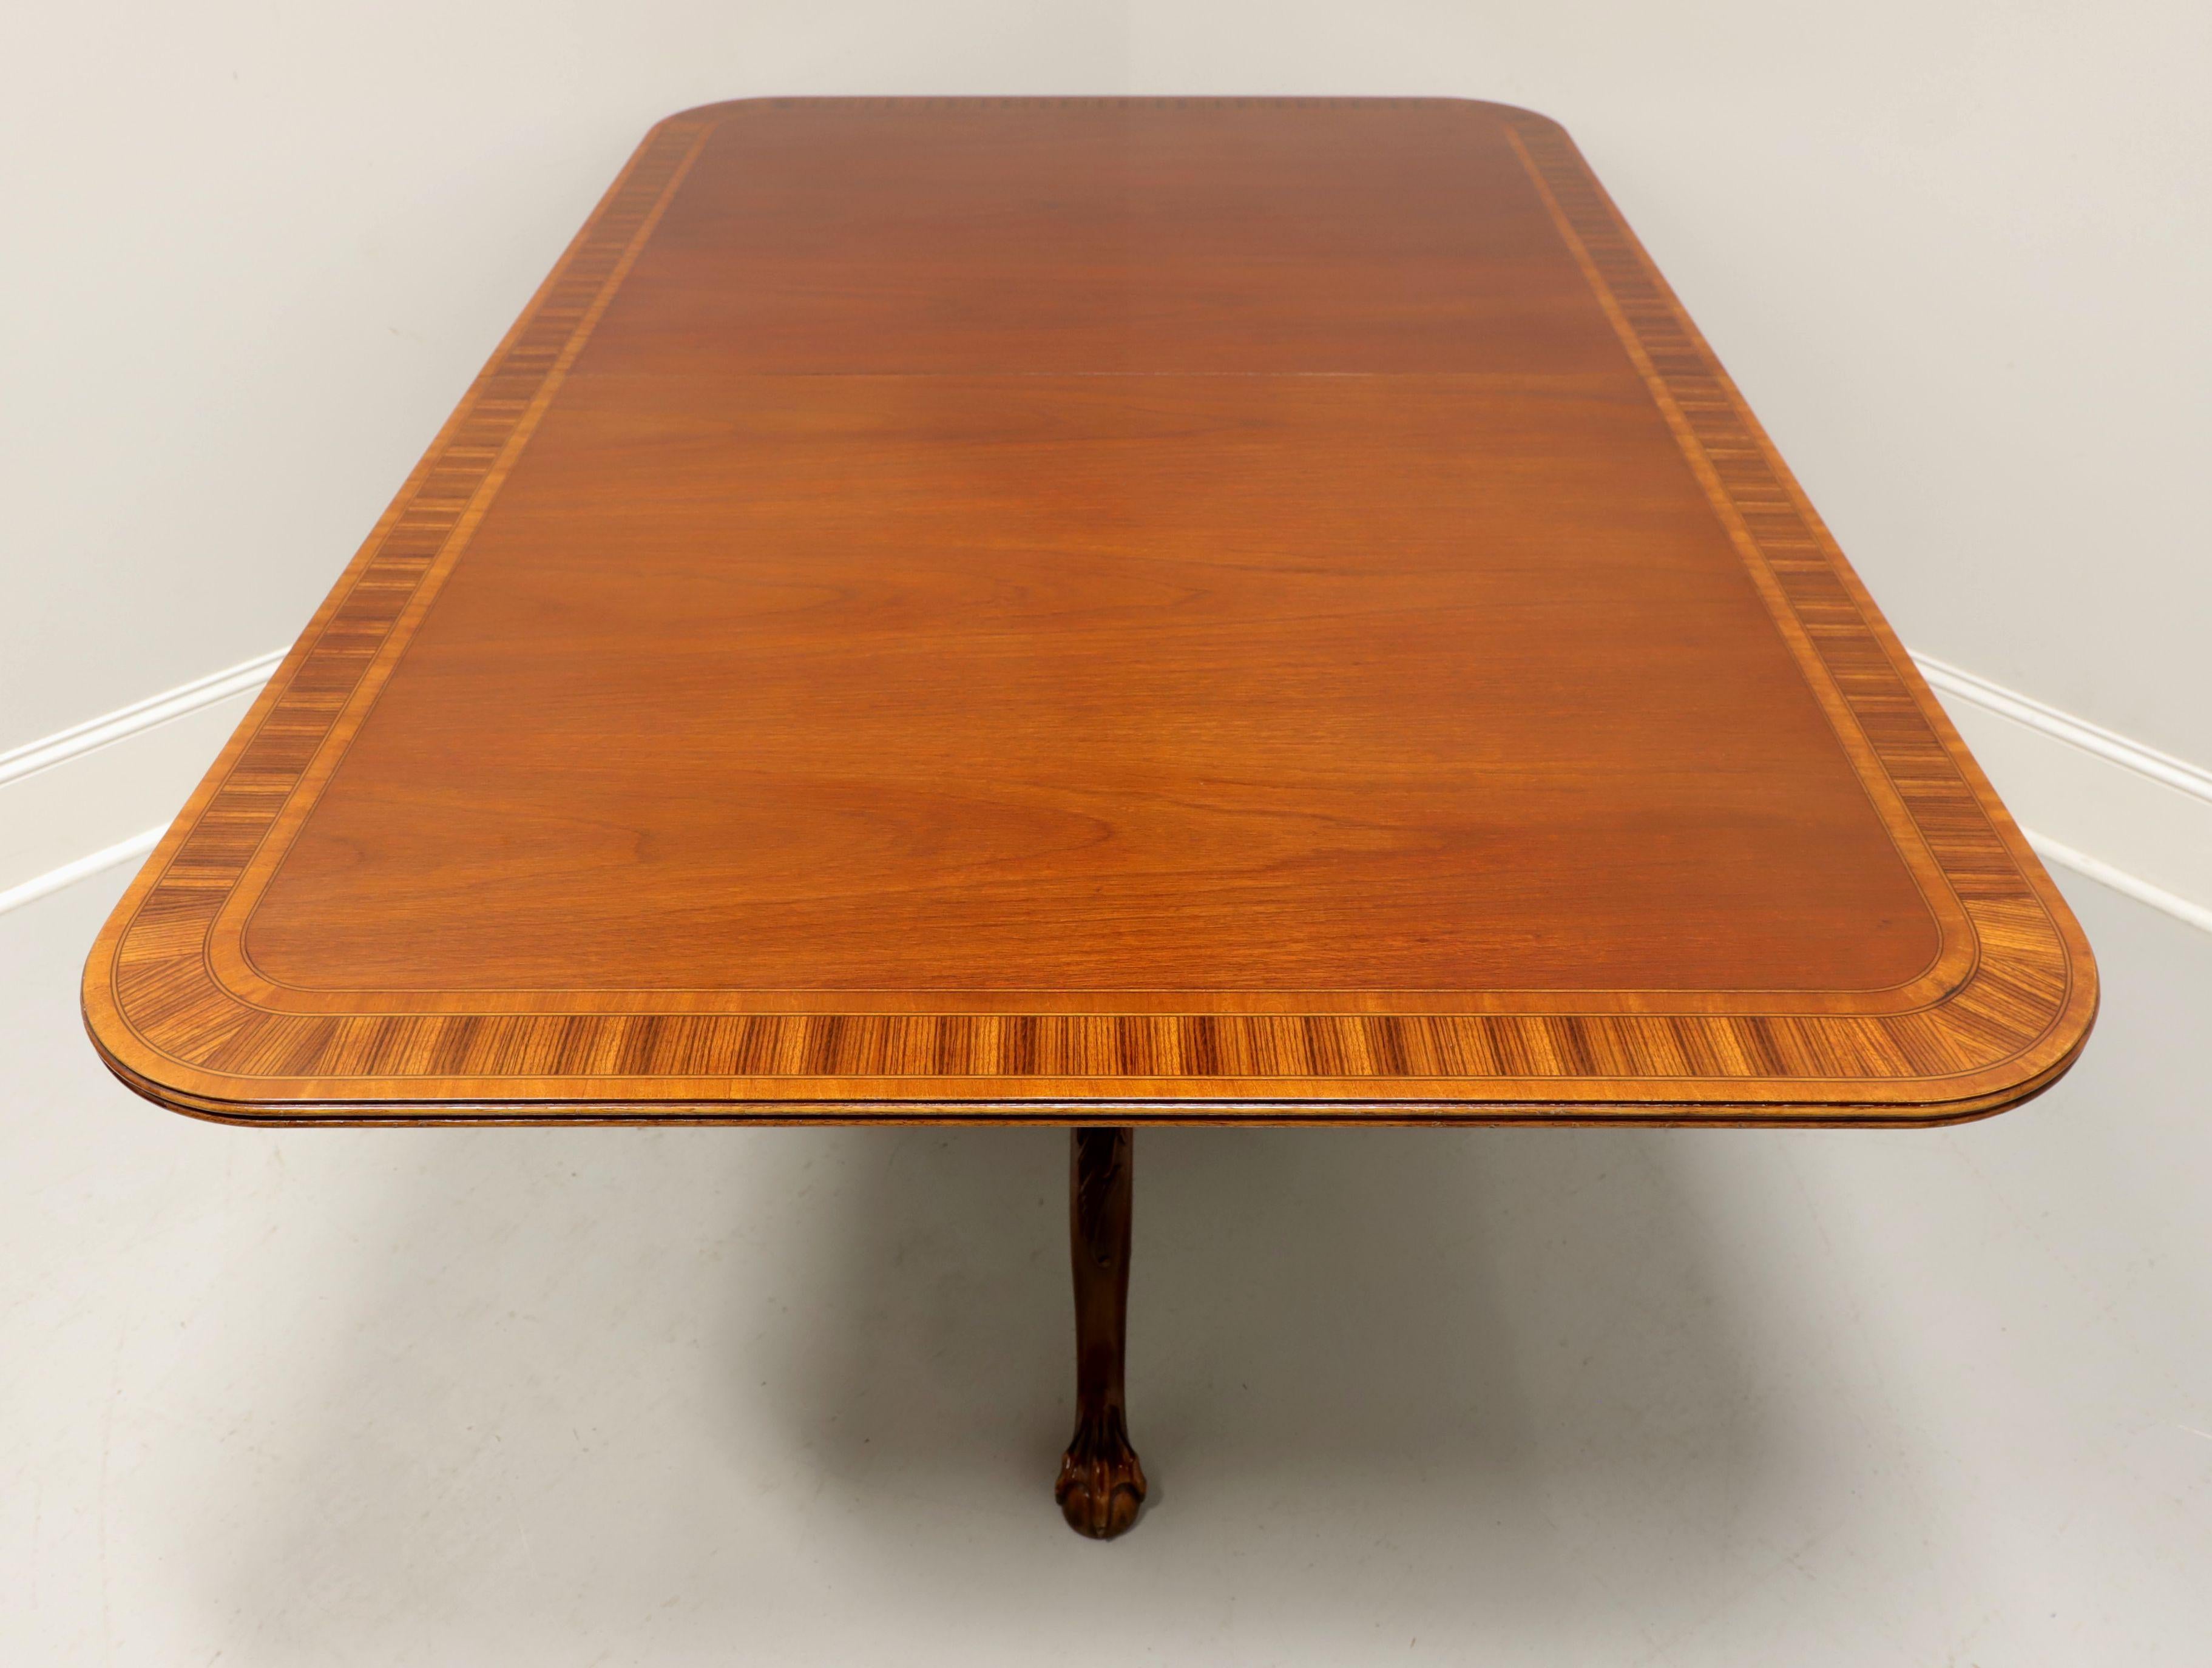 A Chippendale style double pedestal rectangular dining table by Hickory Chair. Mahogany with satinwood banding to top, ribbed edge, dual pedestals with three legs and ball in claw feet. Includes two extension leaves for placement on wood expansion